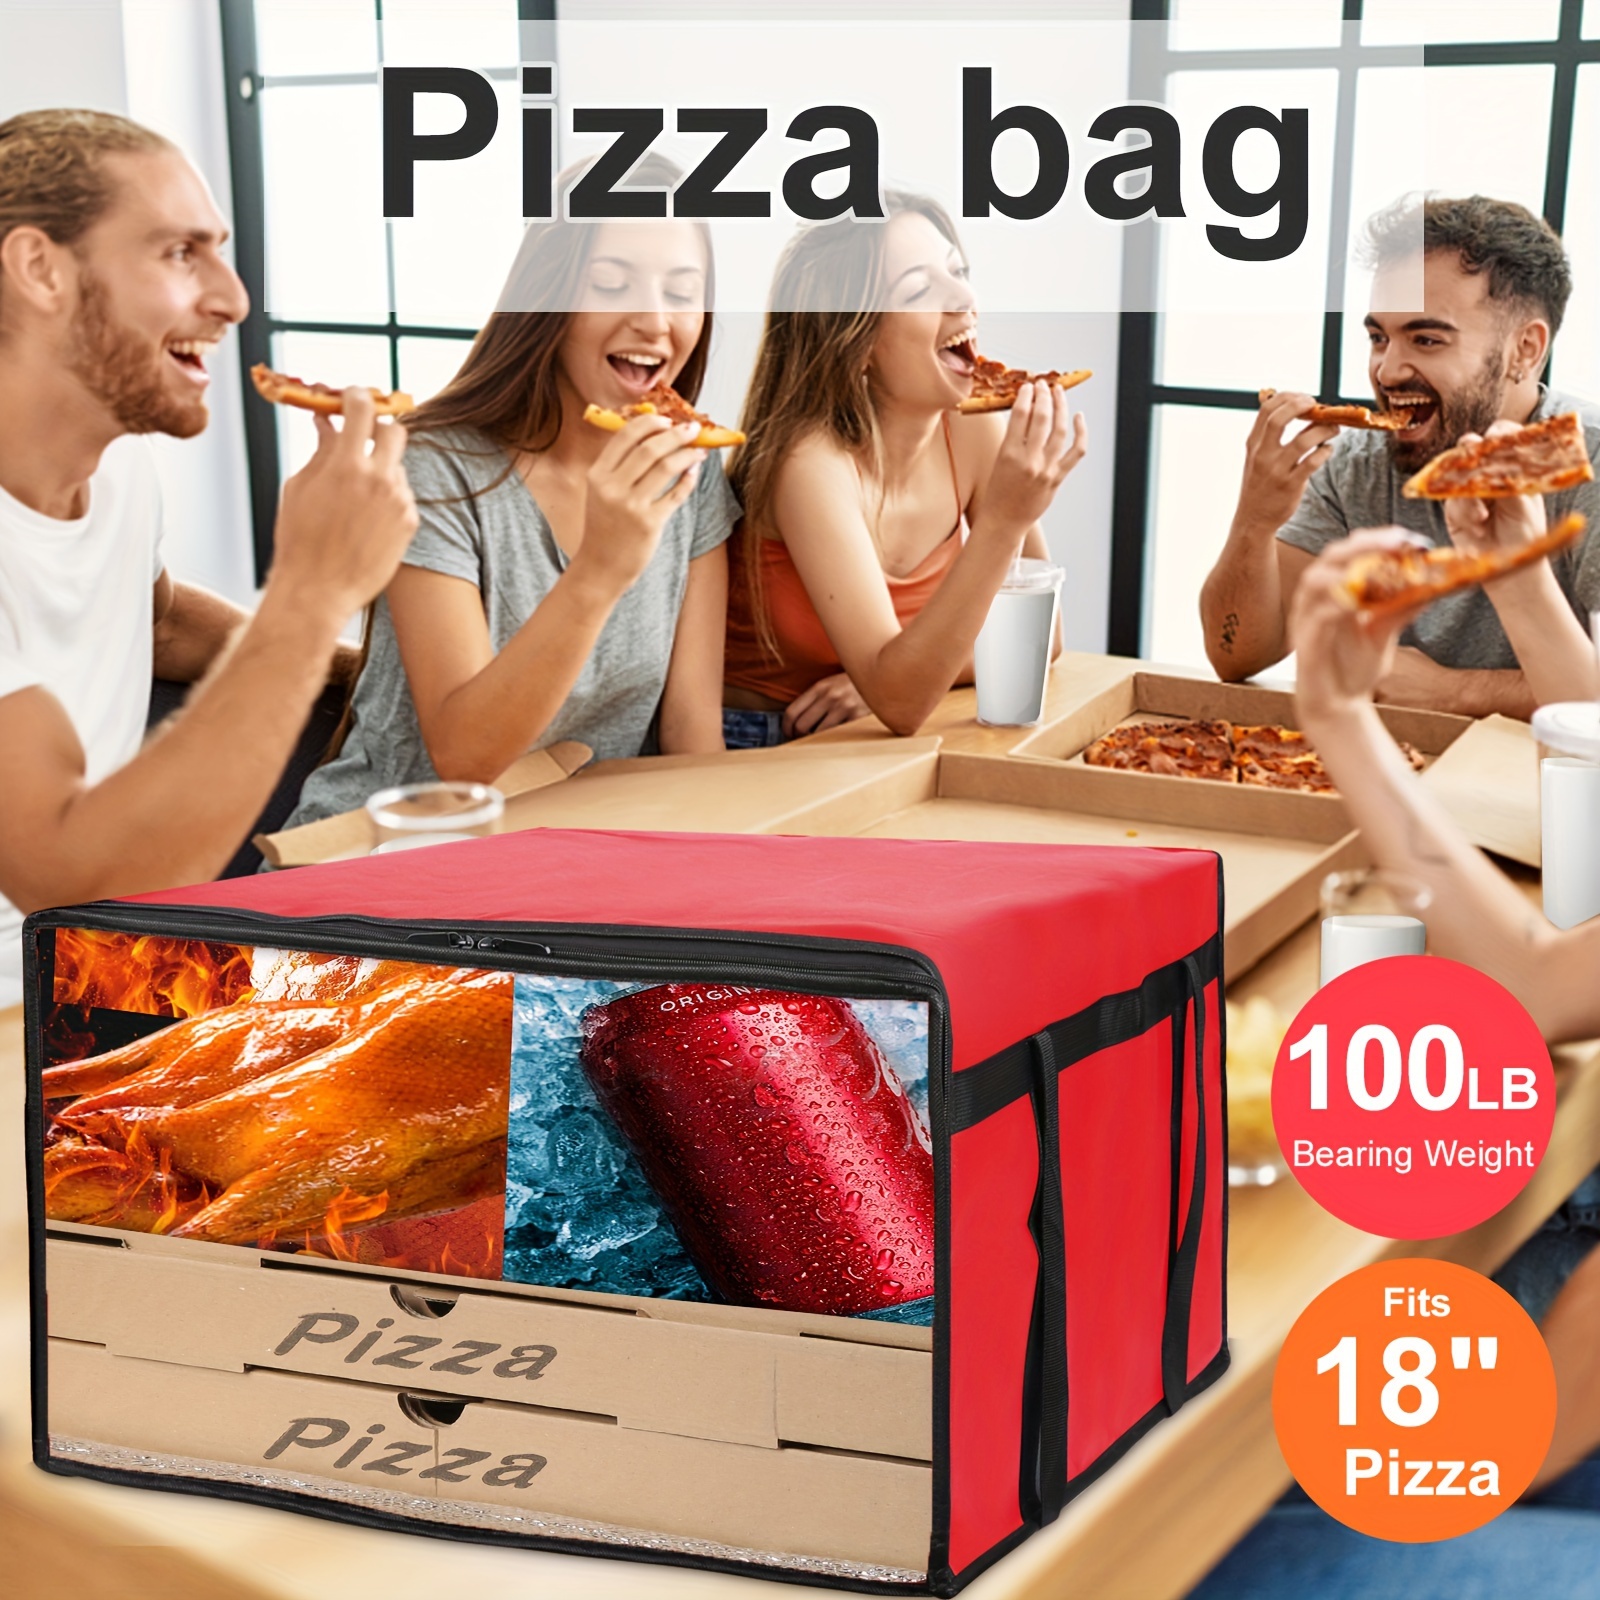 Frcolor Bag Insulated Food Bags Delivery Lunch Thermal Pizza Grocery Tote  Warmer Cooler Box Bento Hot Shopping Catering Carrier